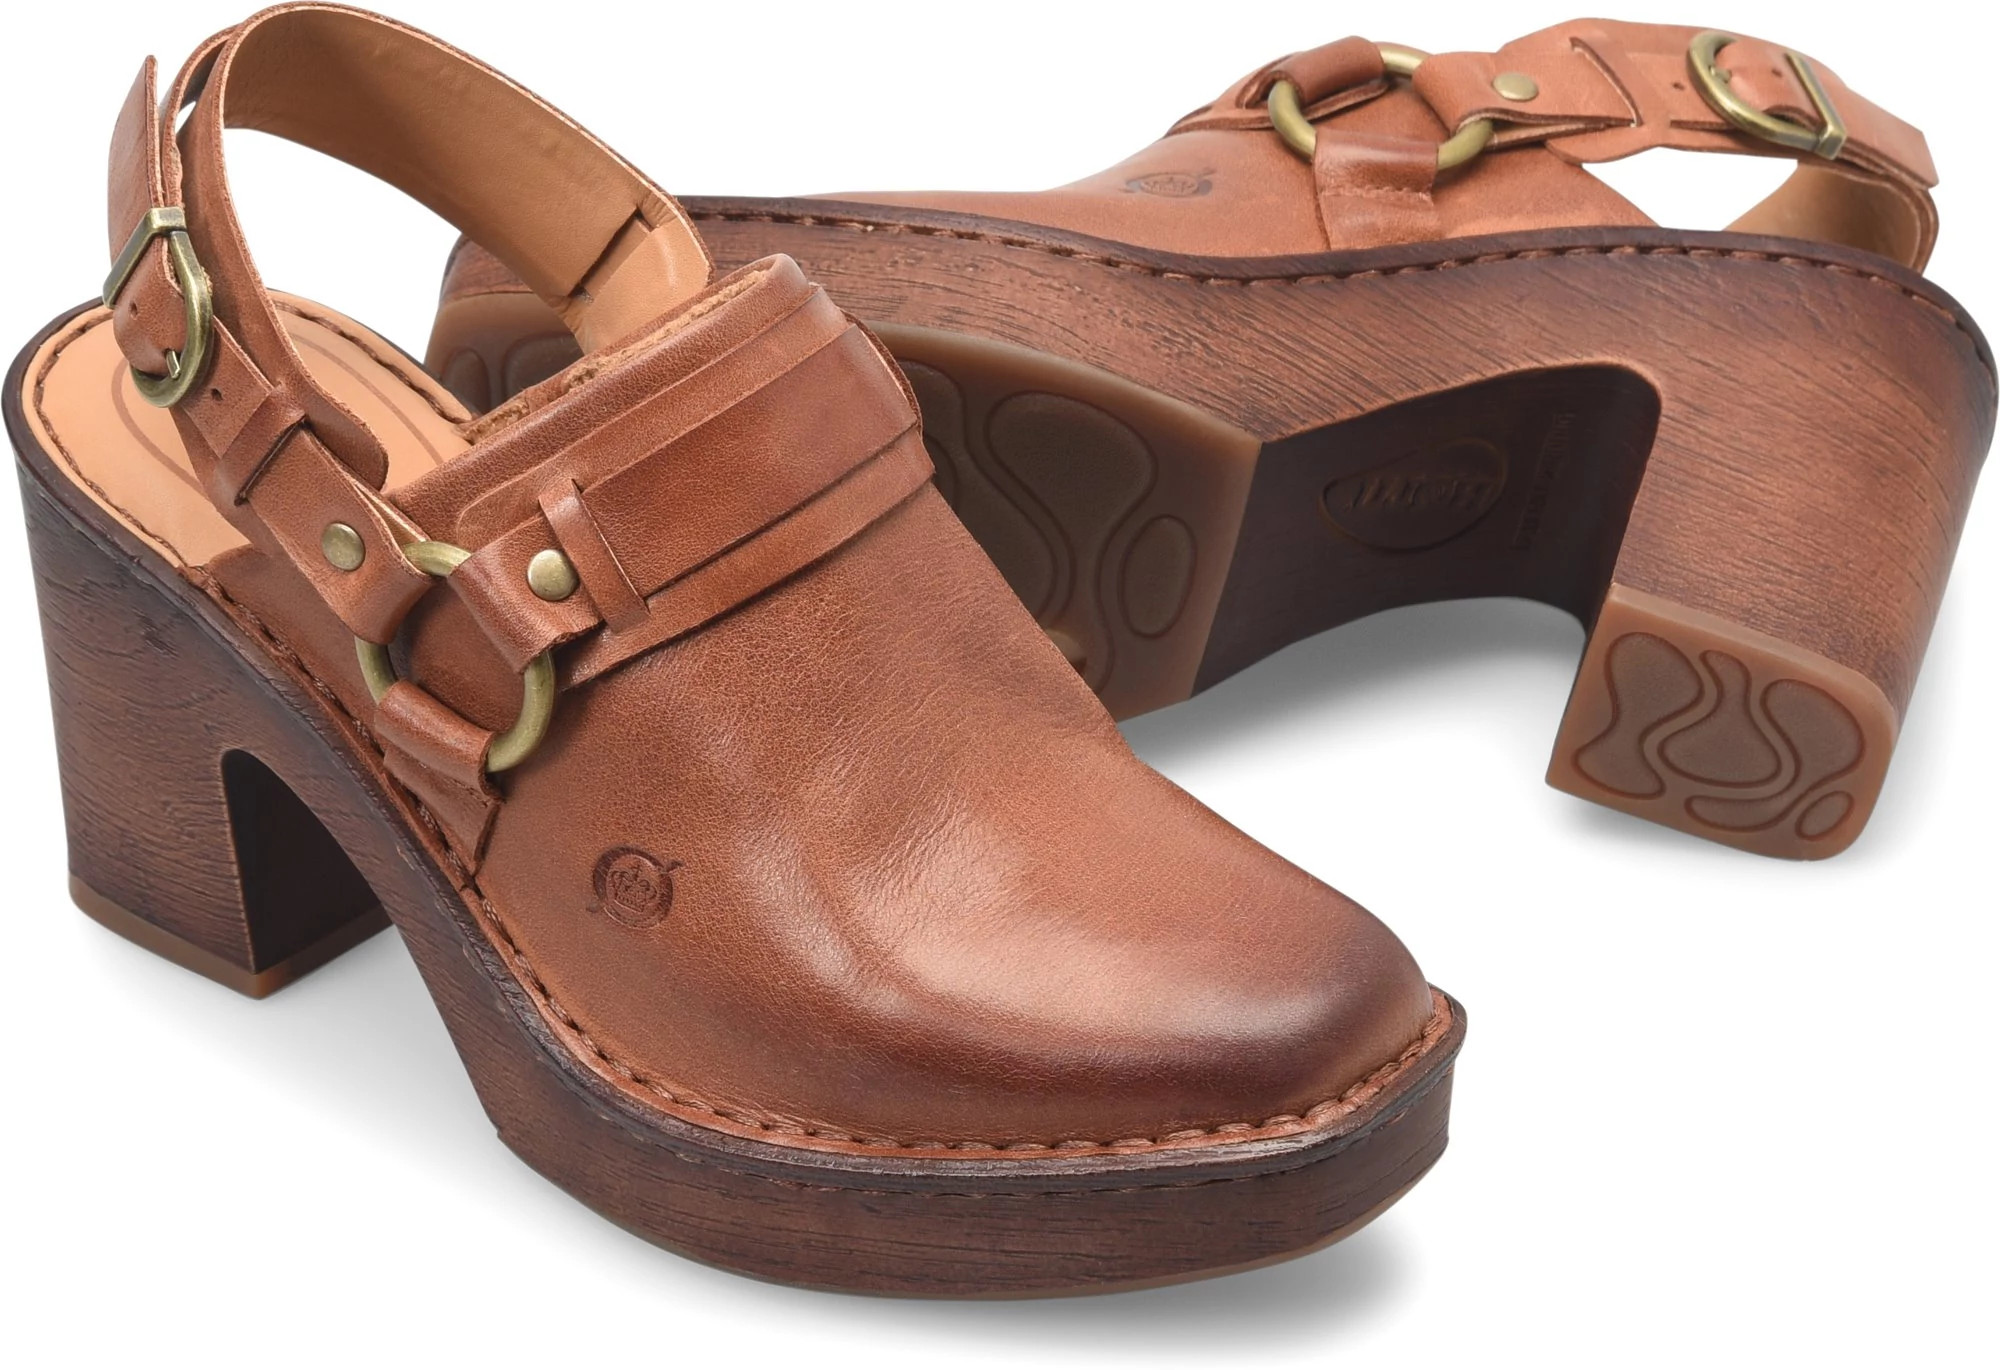 Frye leather clogs shoes w buckle Shoes Womens Shoes Clogs & Mules 